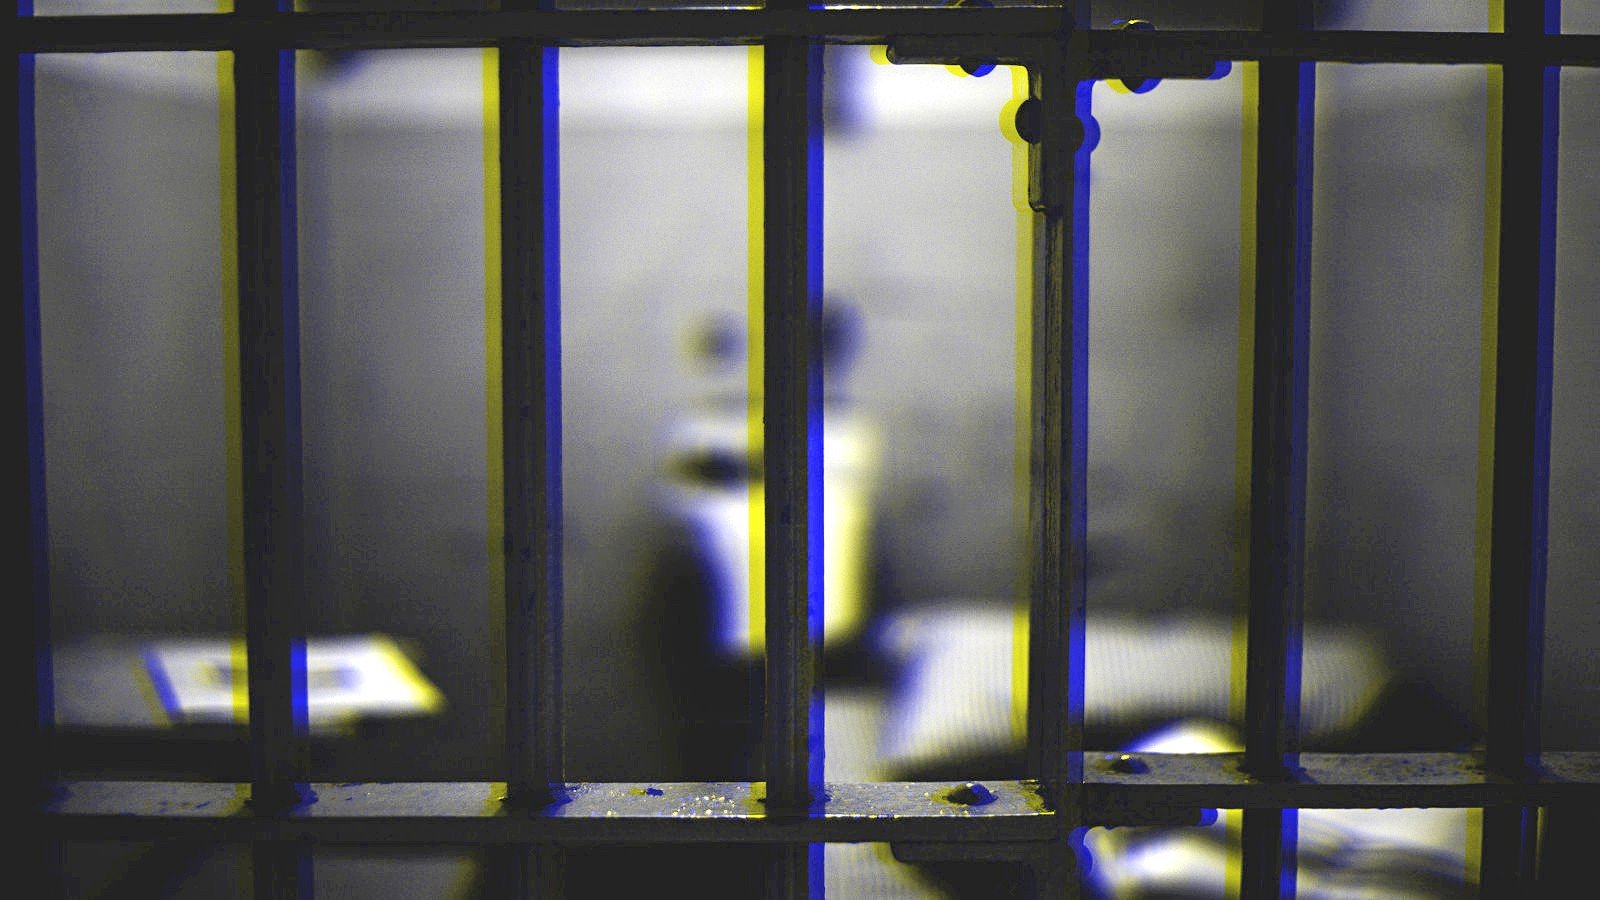 A person receiving IT support from an IT consulting firm while in a jail cell.